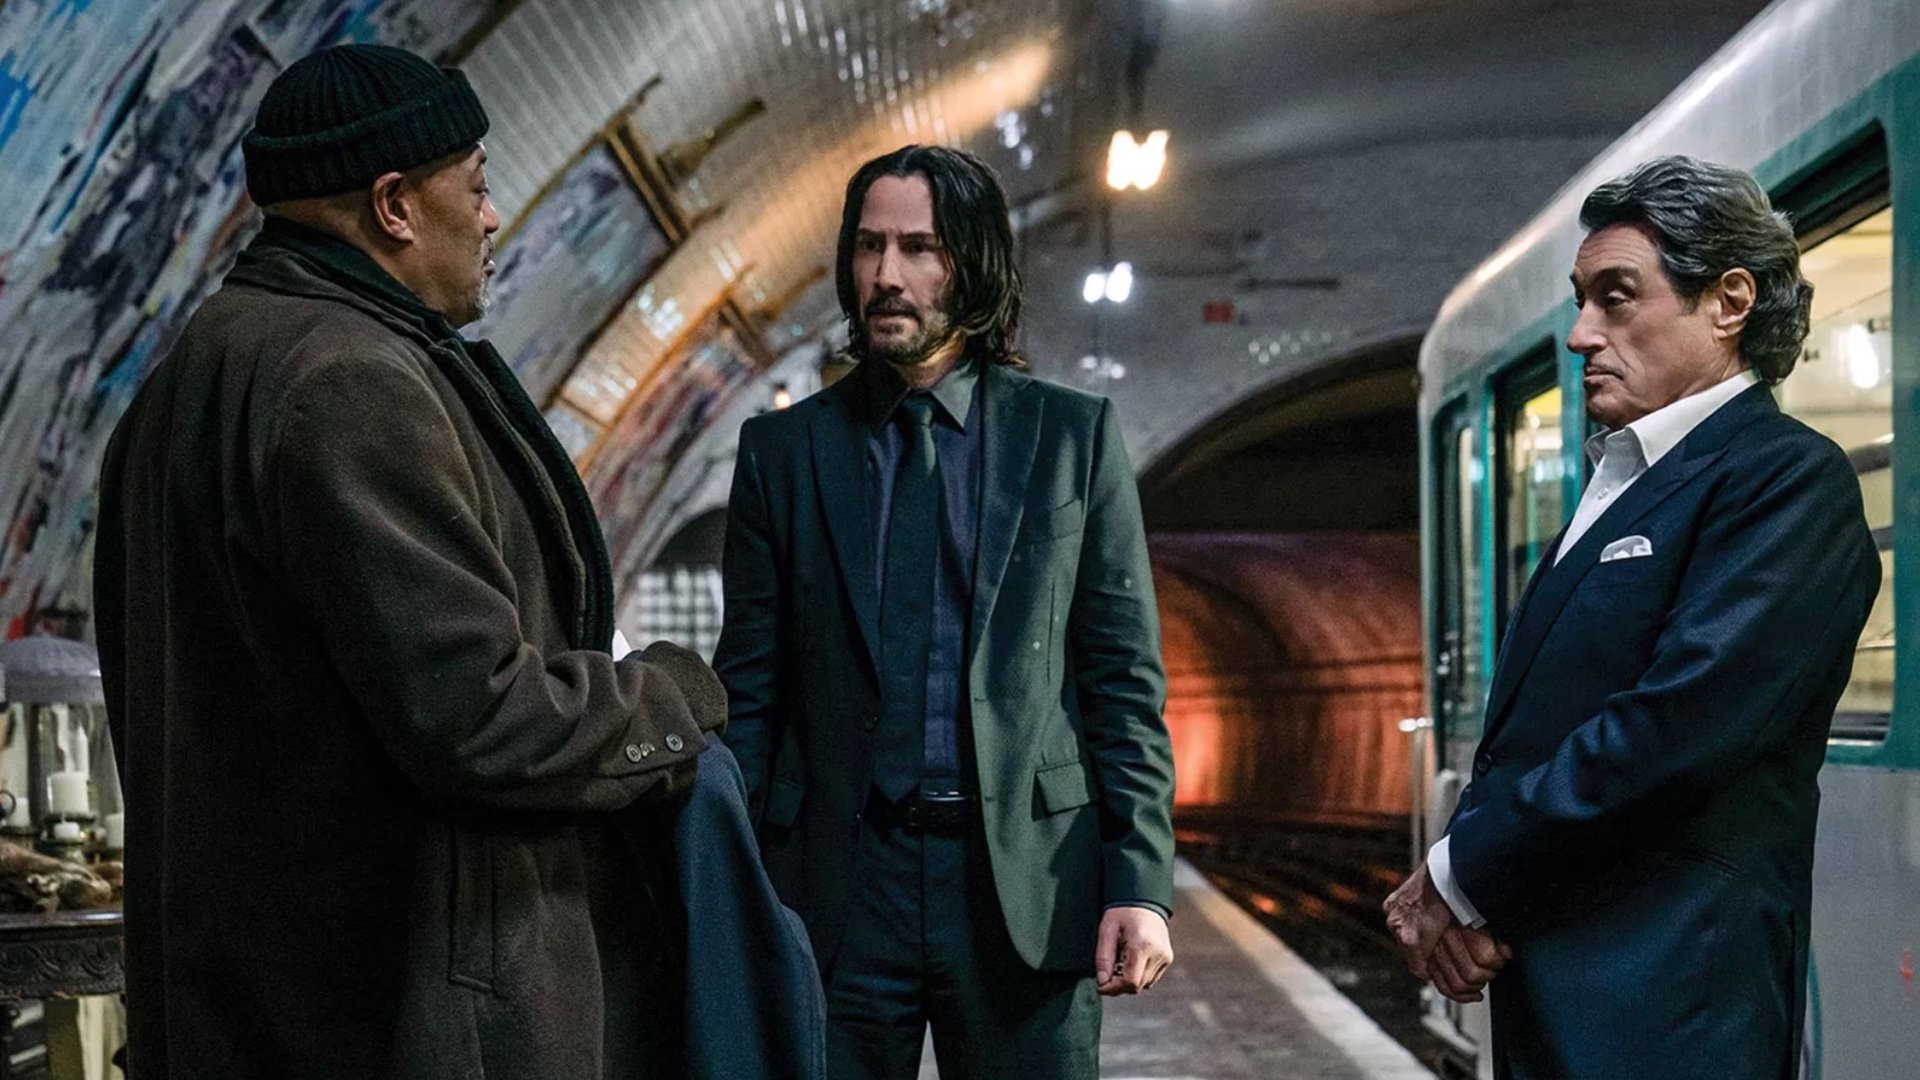 John Wick 4' Composers on Building Orchestral Rock Score for Film